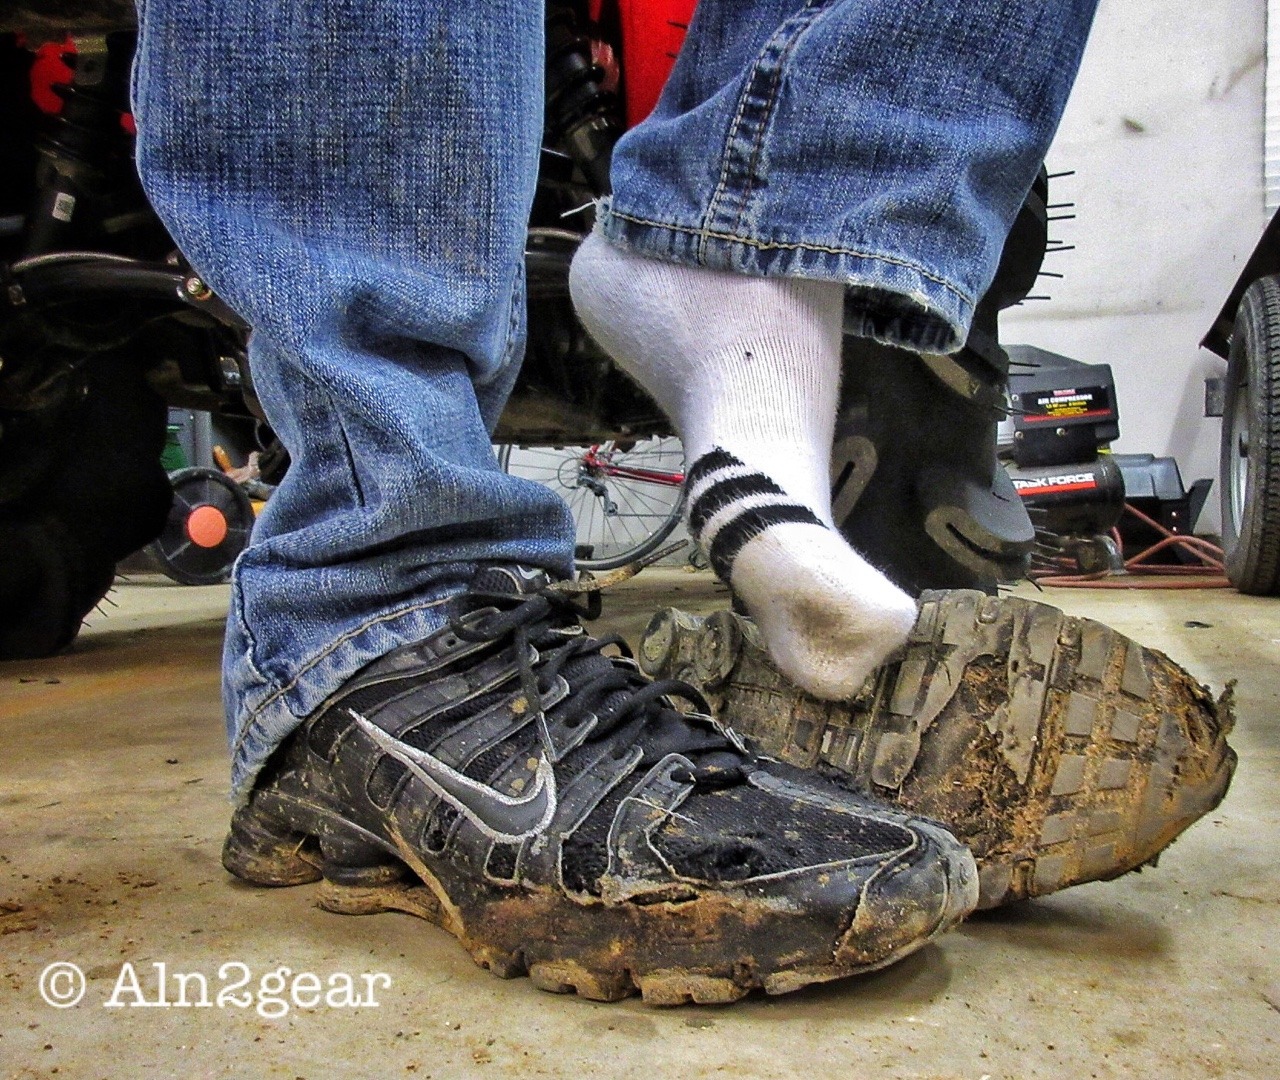 sockjox:  aln2gear:  Workin Double Time! Trashing these Shox for one bud while stinking